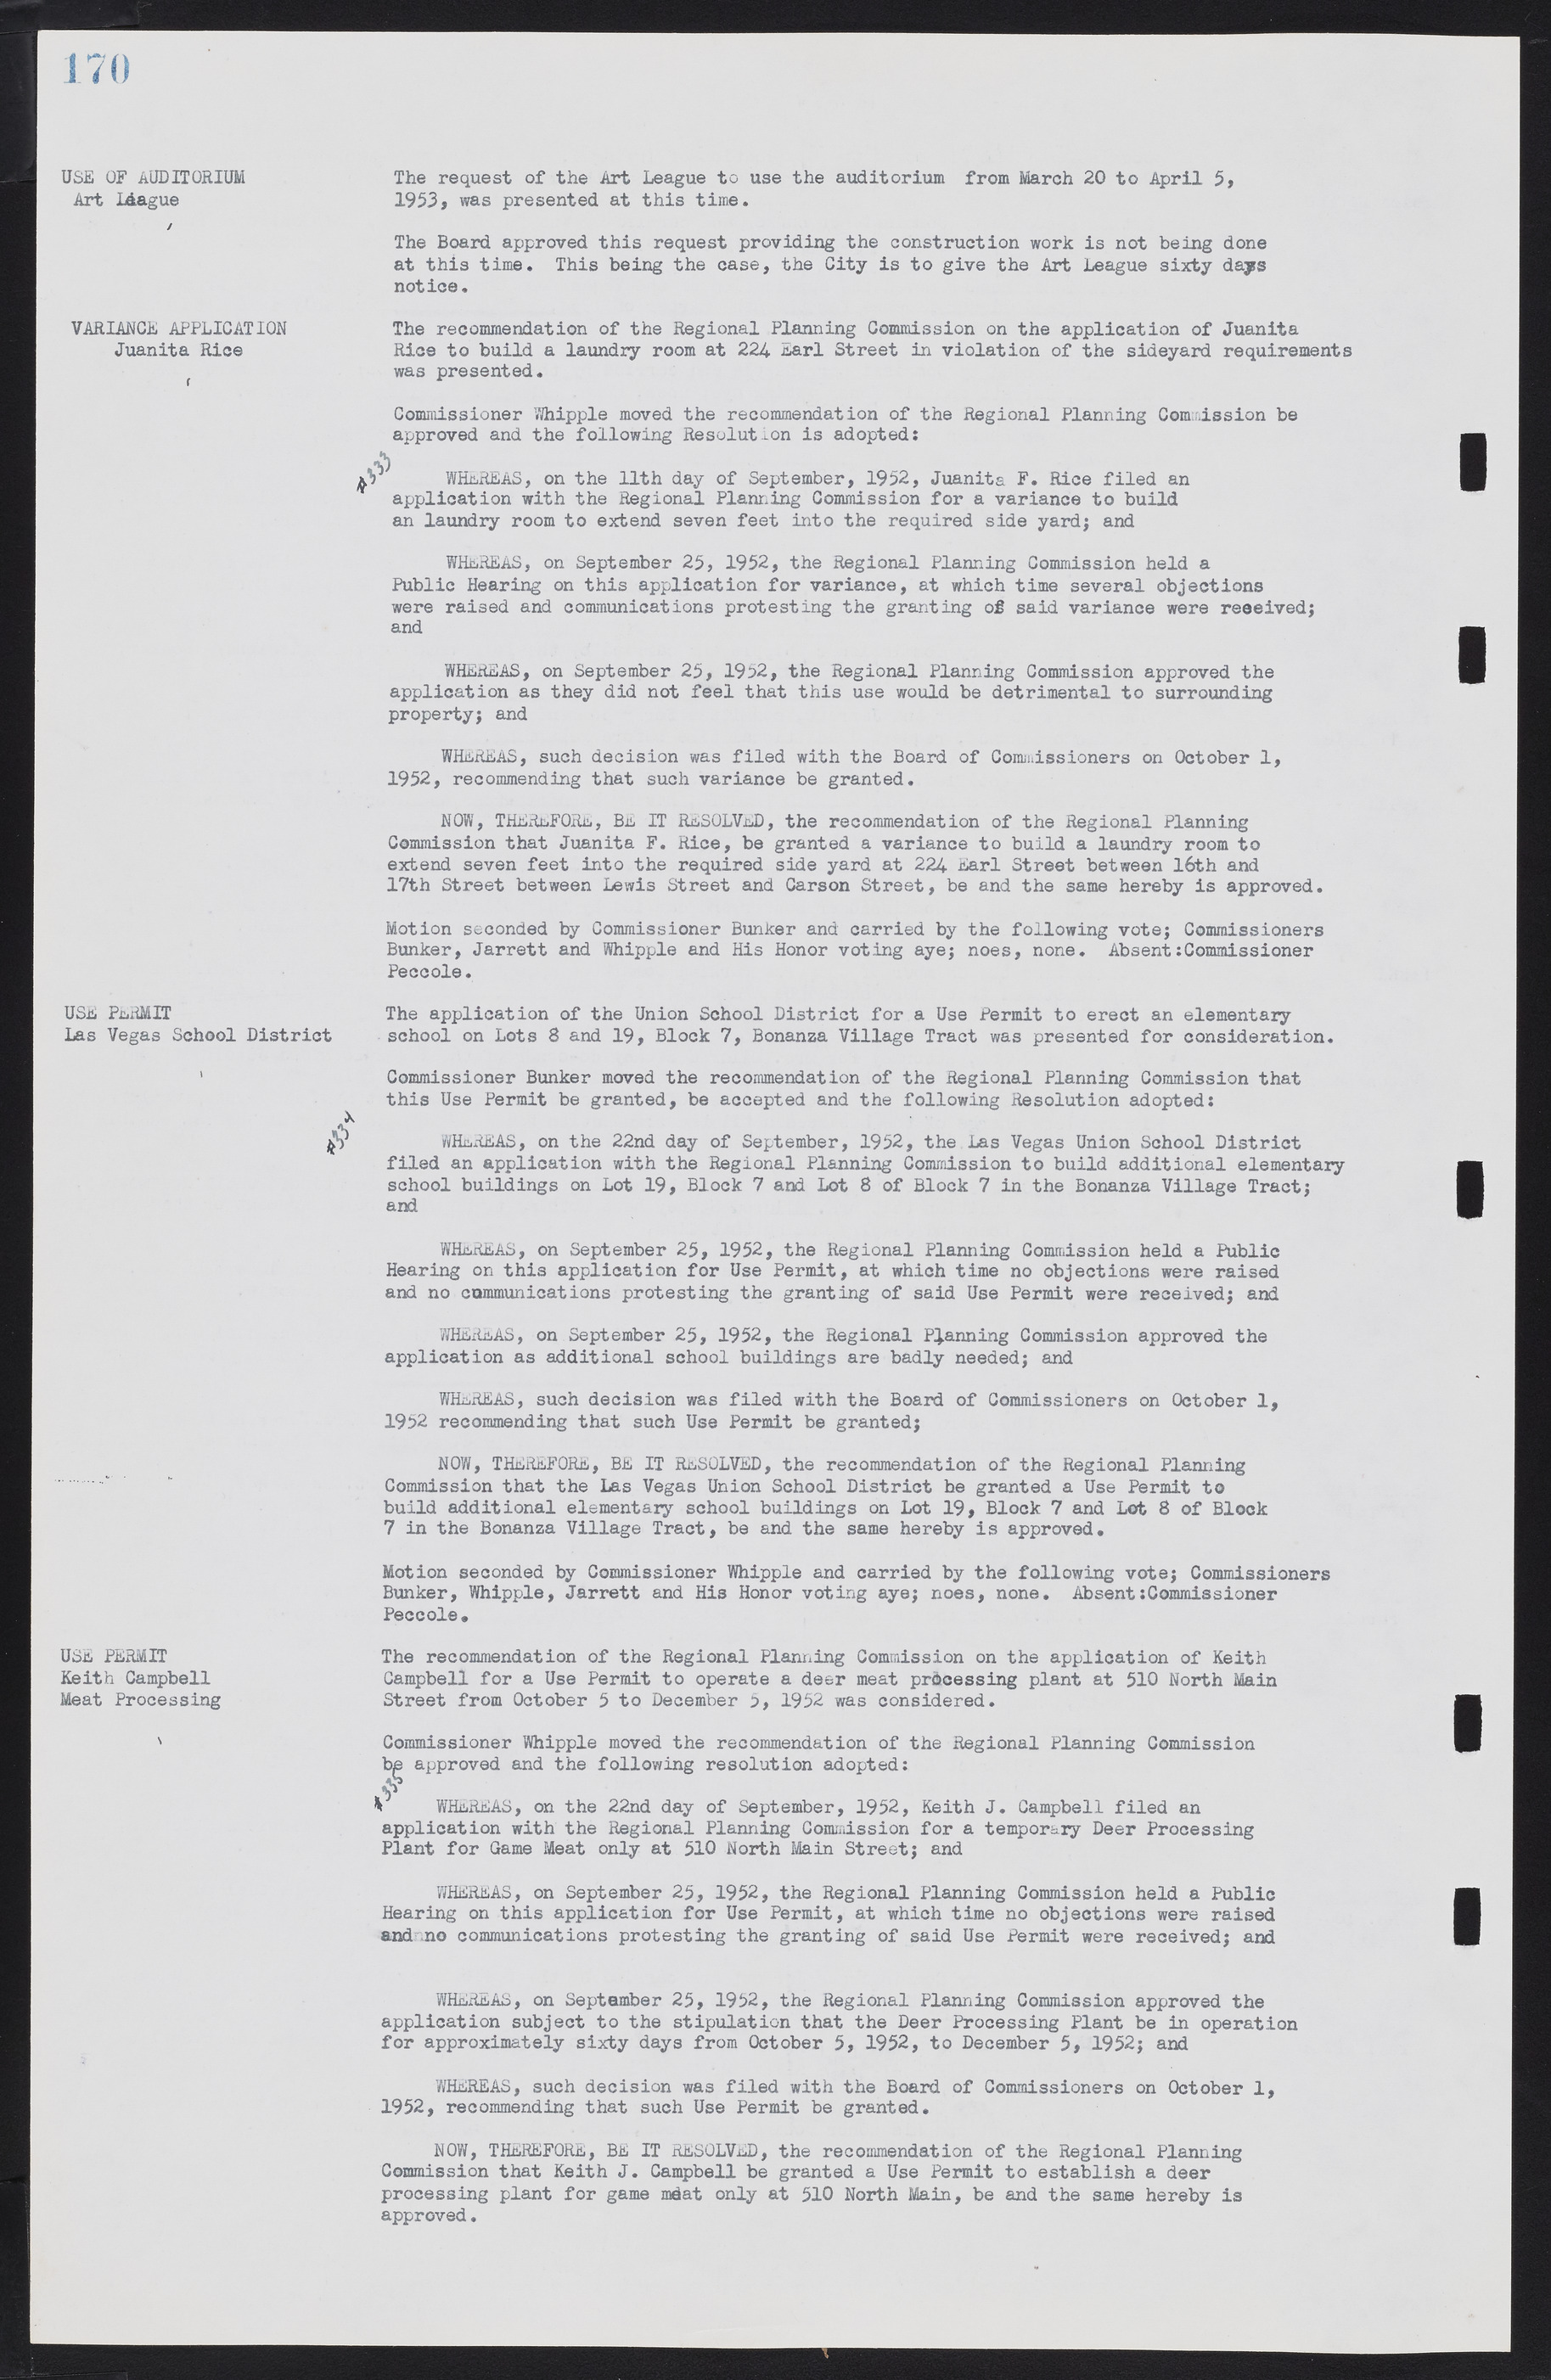 Las Vegas City Commission Minutes, May 26, 1952 to February 17, 1954, lvc000008-184